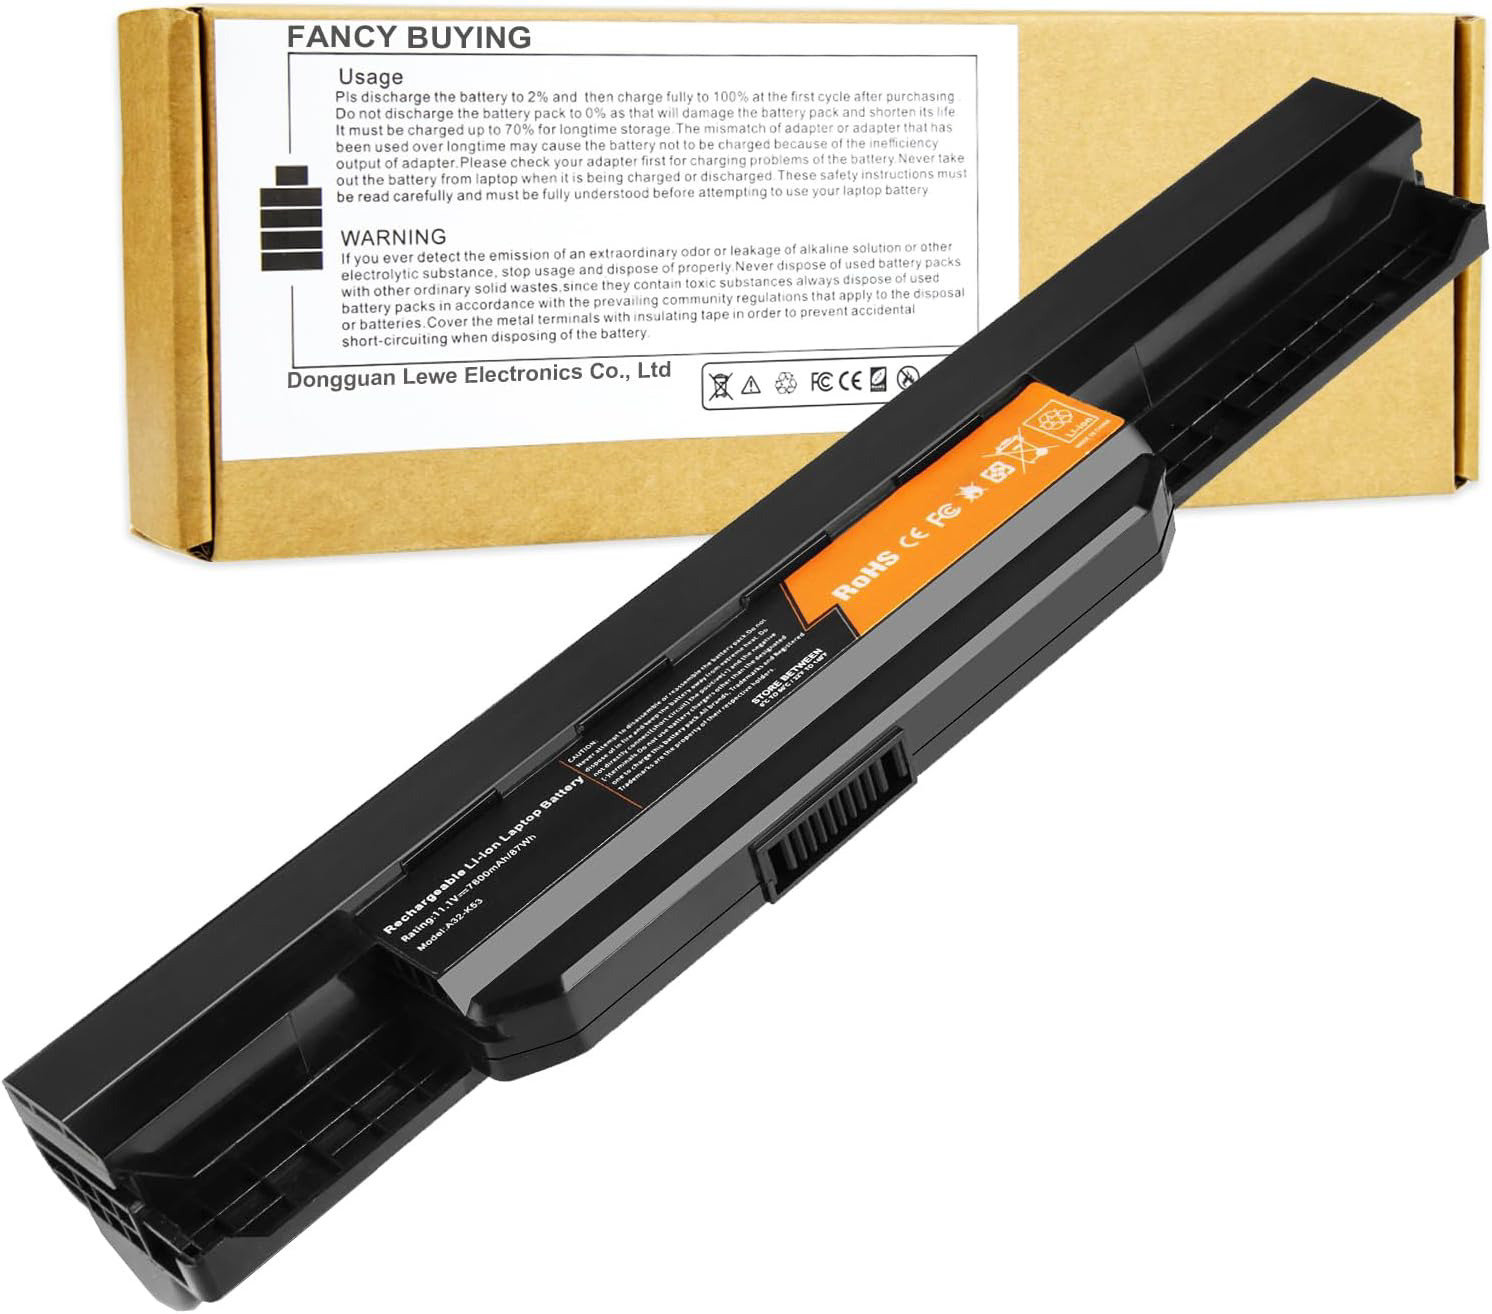 7800mAh 9-Cell New Laptop Battery Replacement for Asus K53 K53E X54C X53S X53 K5